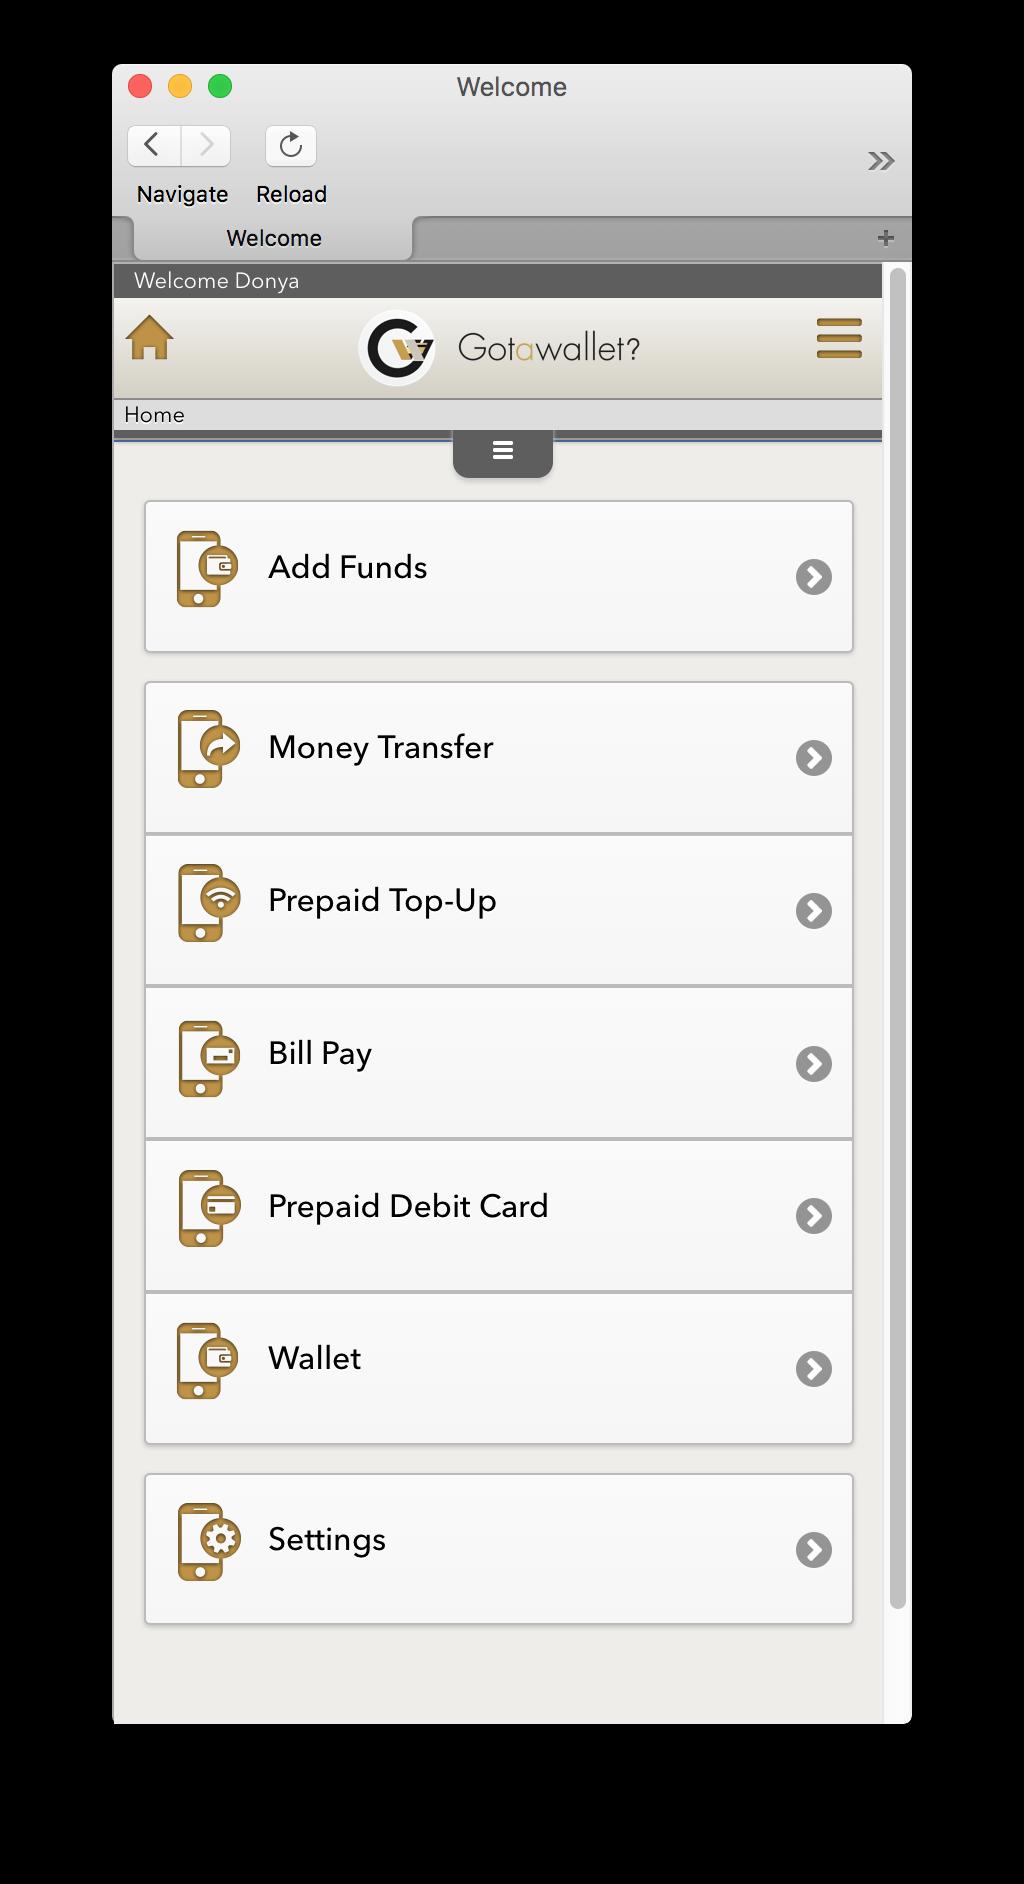 Bringing multiple MFS in to one simple solution (Mobile, Tablet or Desktop) Telecom Mobile telecom account management and payment Prepaid Debit Card Prepaid Debit Card with Cash-in and Cash-out Money